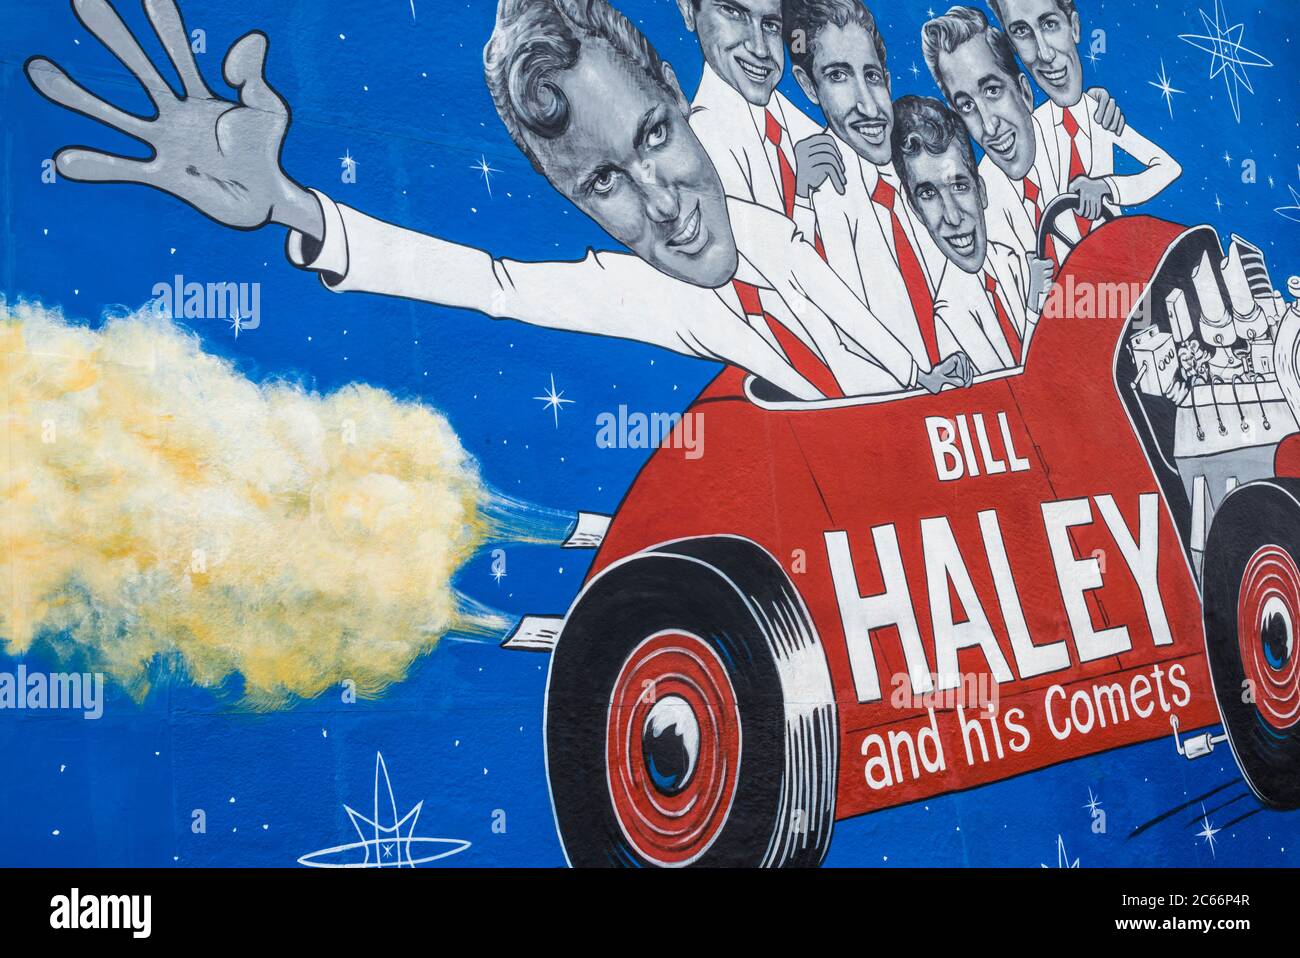 USA, New Jersey, The Jersey Shore, Wildwoods, 1950s-1960s rock and roll history, mural for Bill Haley and his Comets Stock Photo